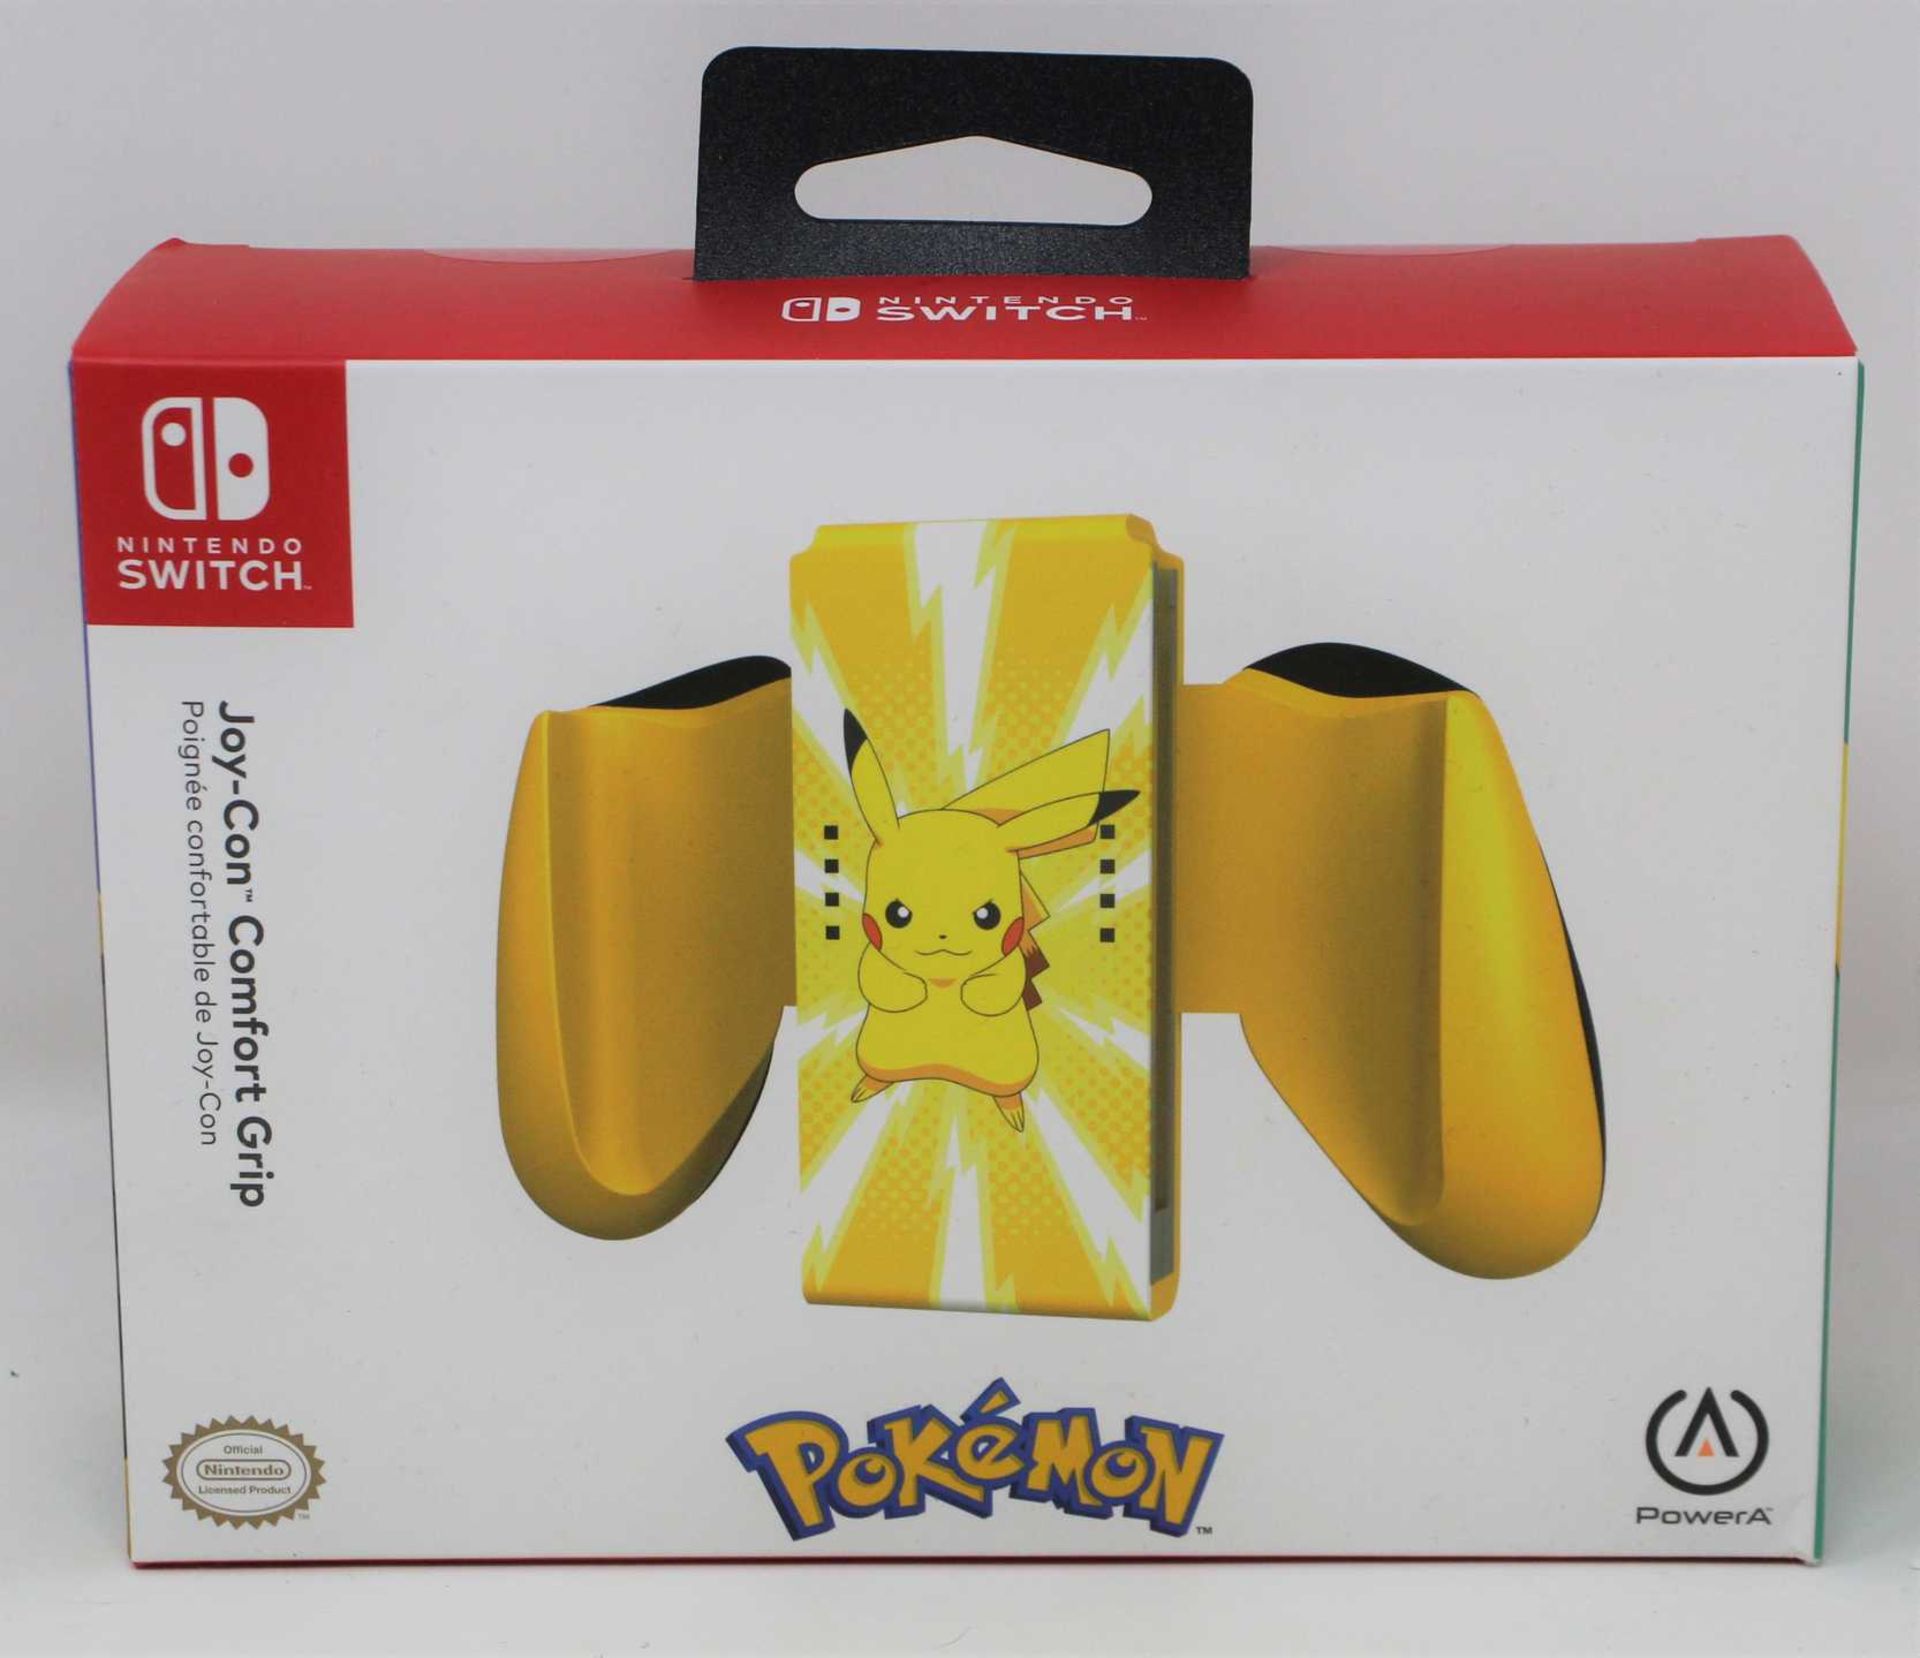 A boxed as new PowerA Pikachu Edition Joy-Con Comfort Grip for Nintendo Switch (Box sealed).